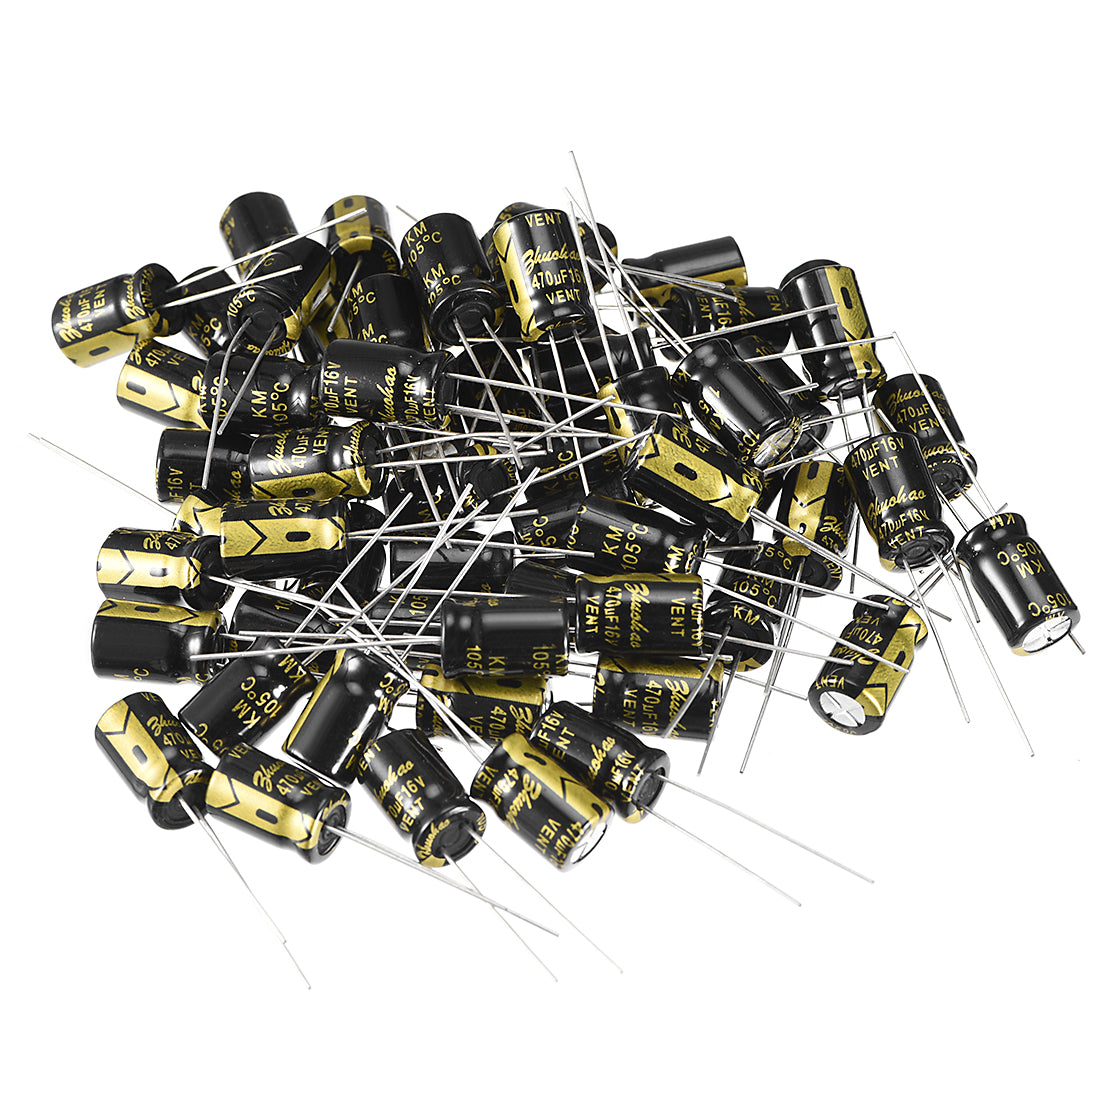 uxcell Uxcell Aluminum Radial Electrolytic Capacitor with 470uF 16V 105 Celsius Life 2000H 8 x 12 mm Black 60pcs